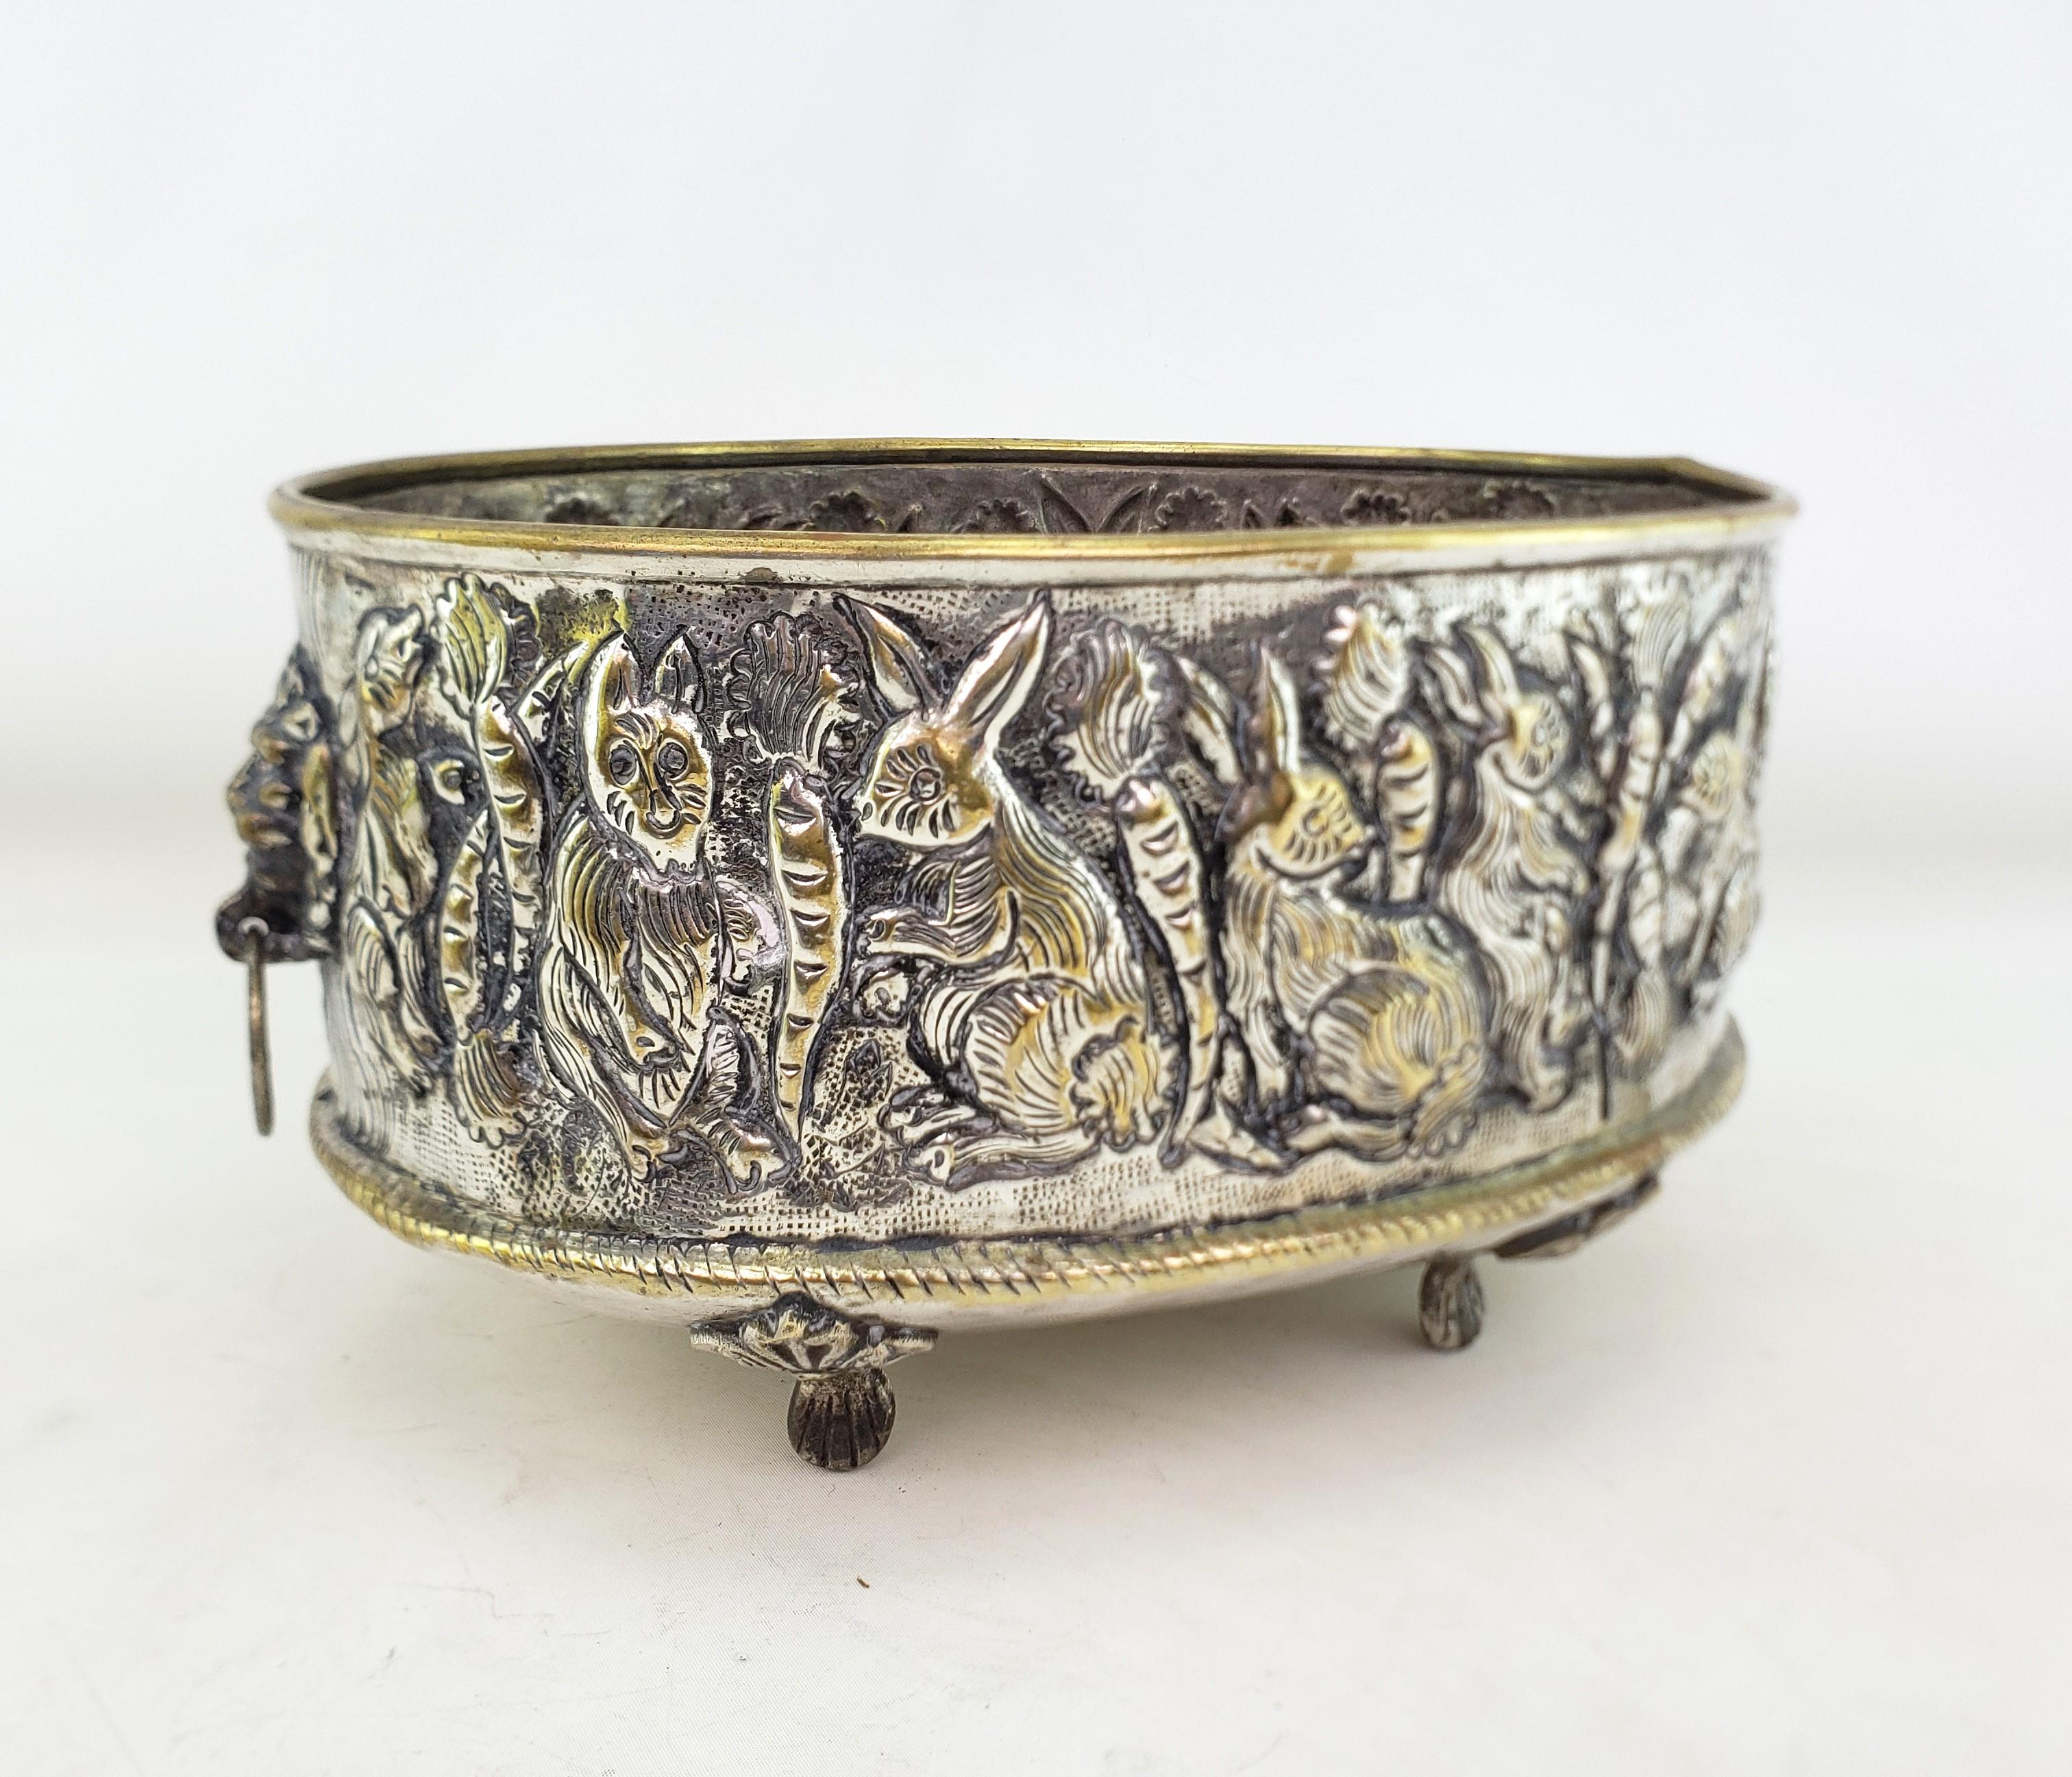 Late Victorian Antique English Hand-Crafted Plated Brass Planter with Whimsical Rabbits For Sale